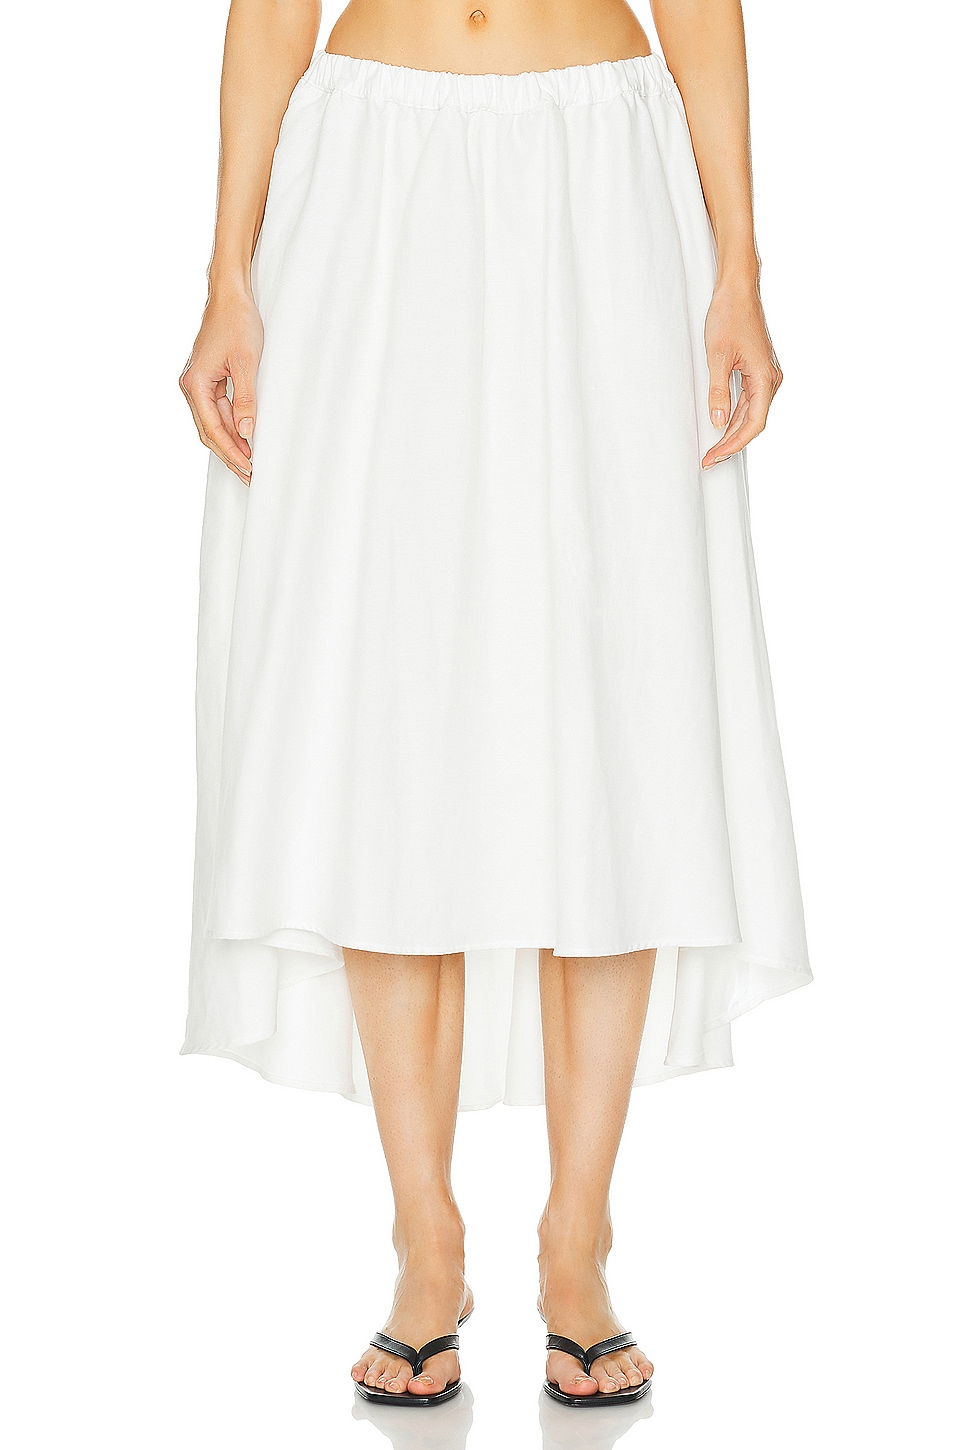 Image 1 of Enza Costa Twill Circle Skirt in Off White